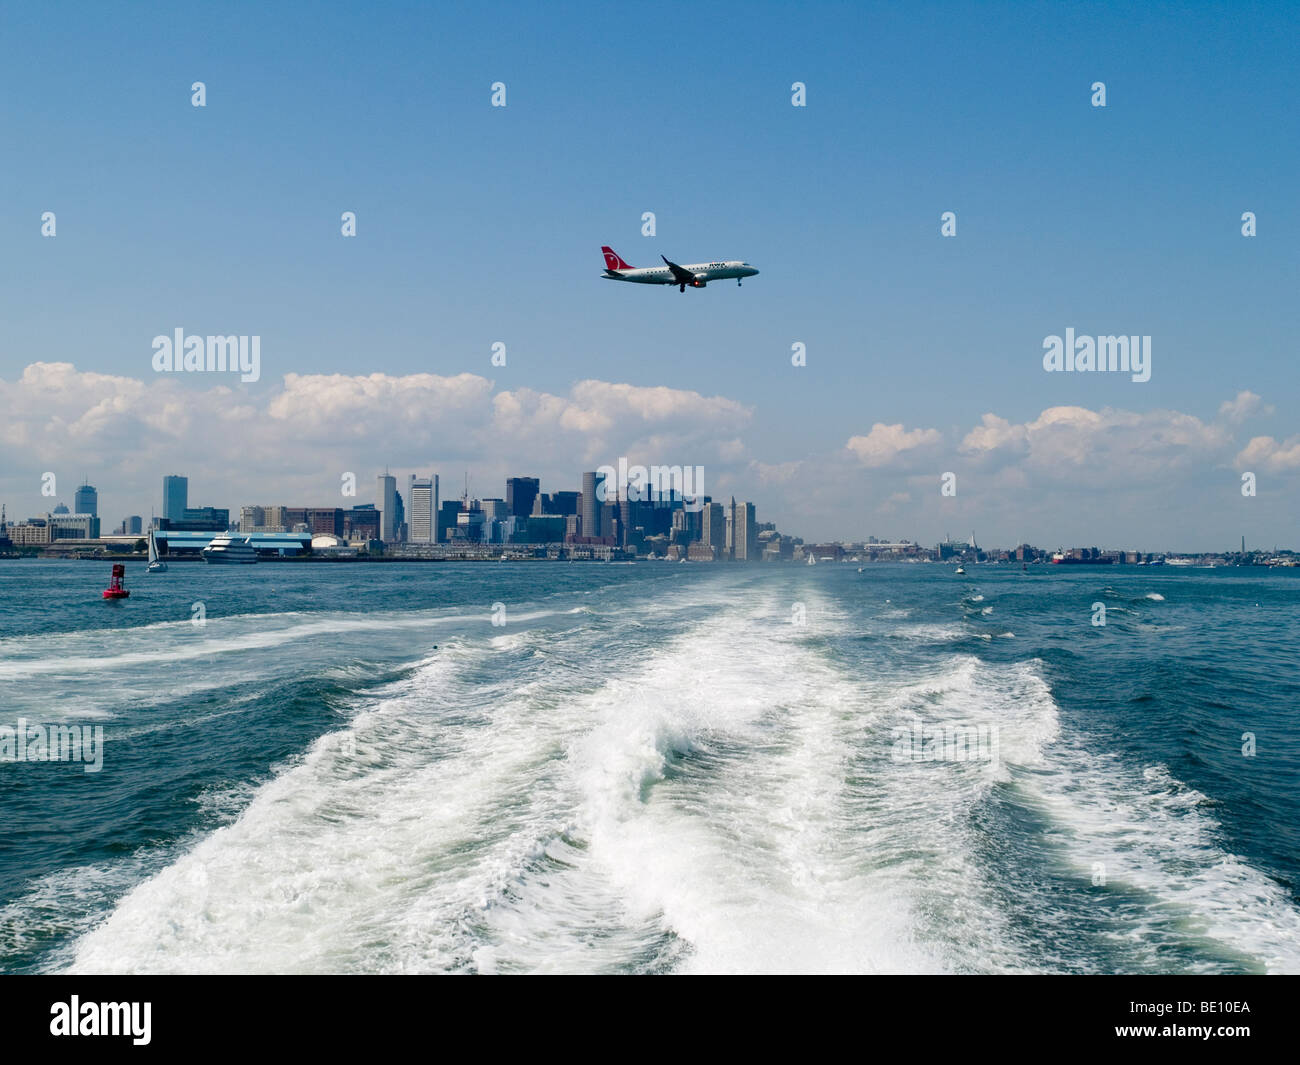 A plane coming in to land at Logan International Airport in Boston, Massachusetts USA Stock Photo